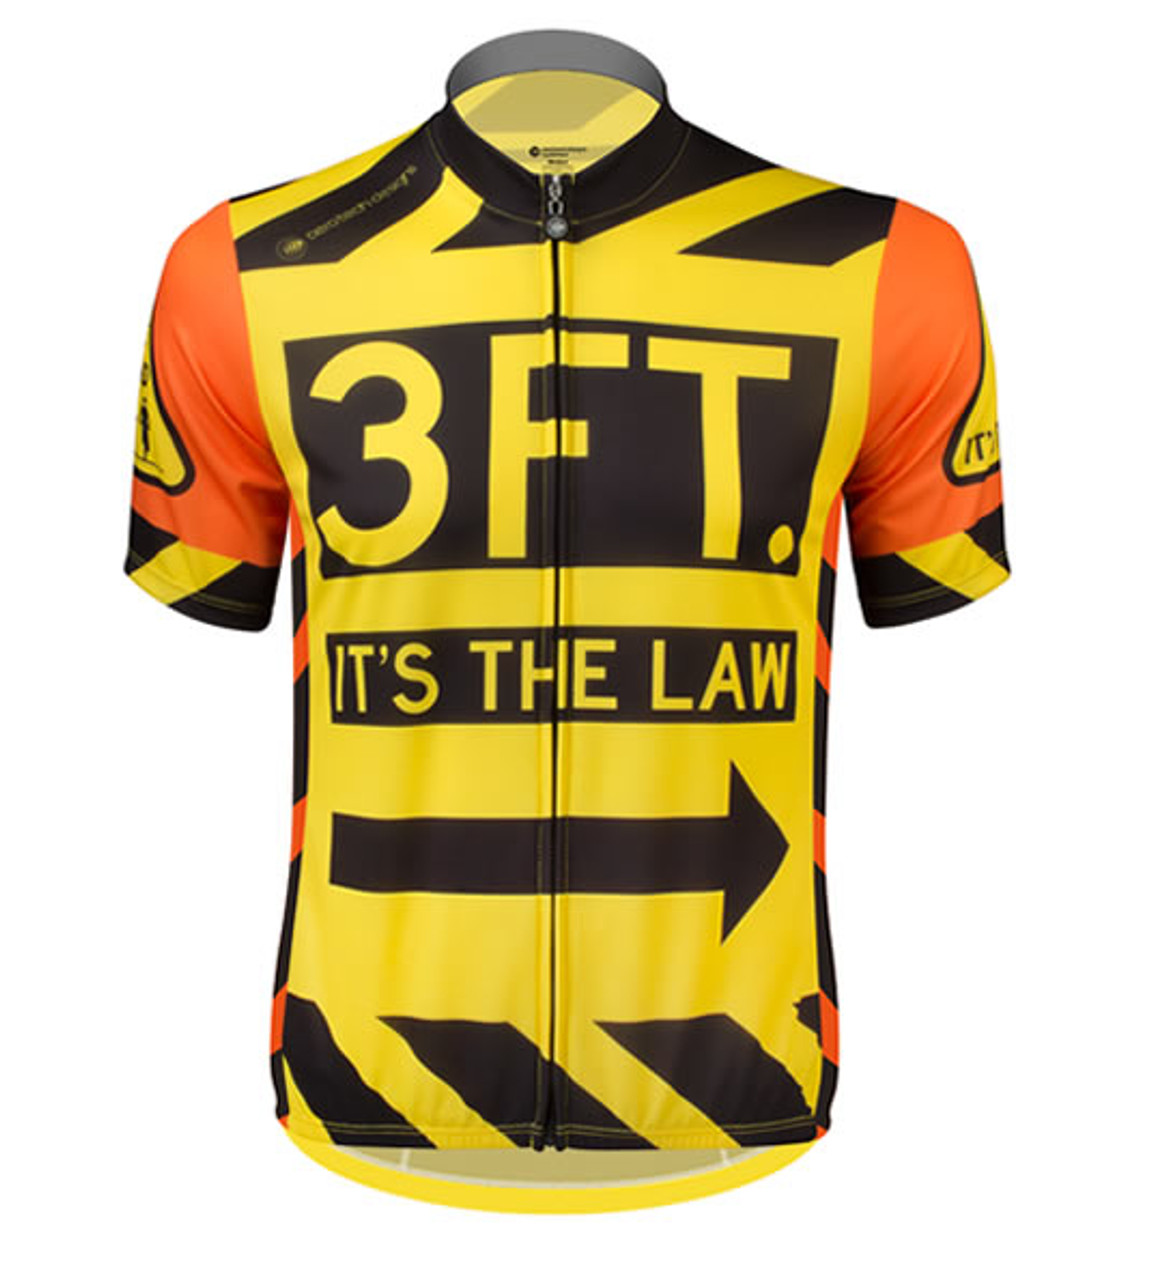 the cycling jersey